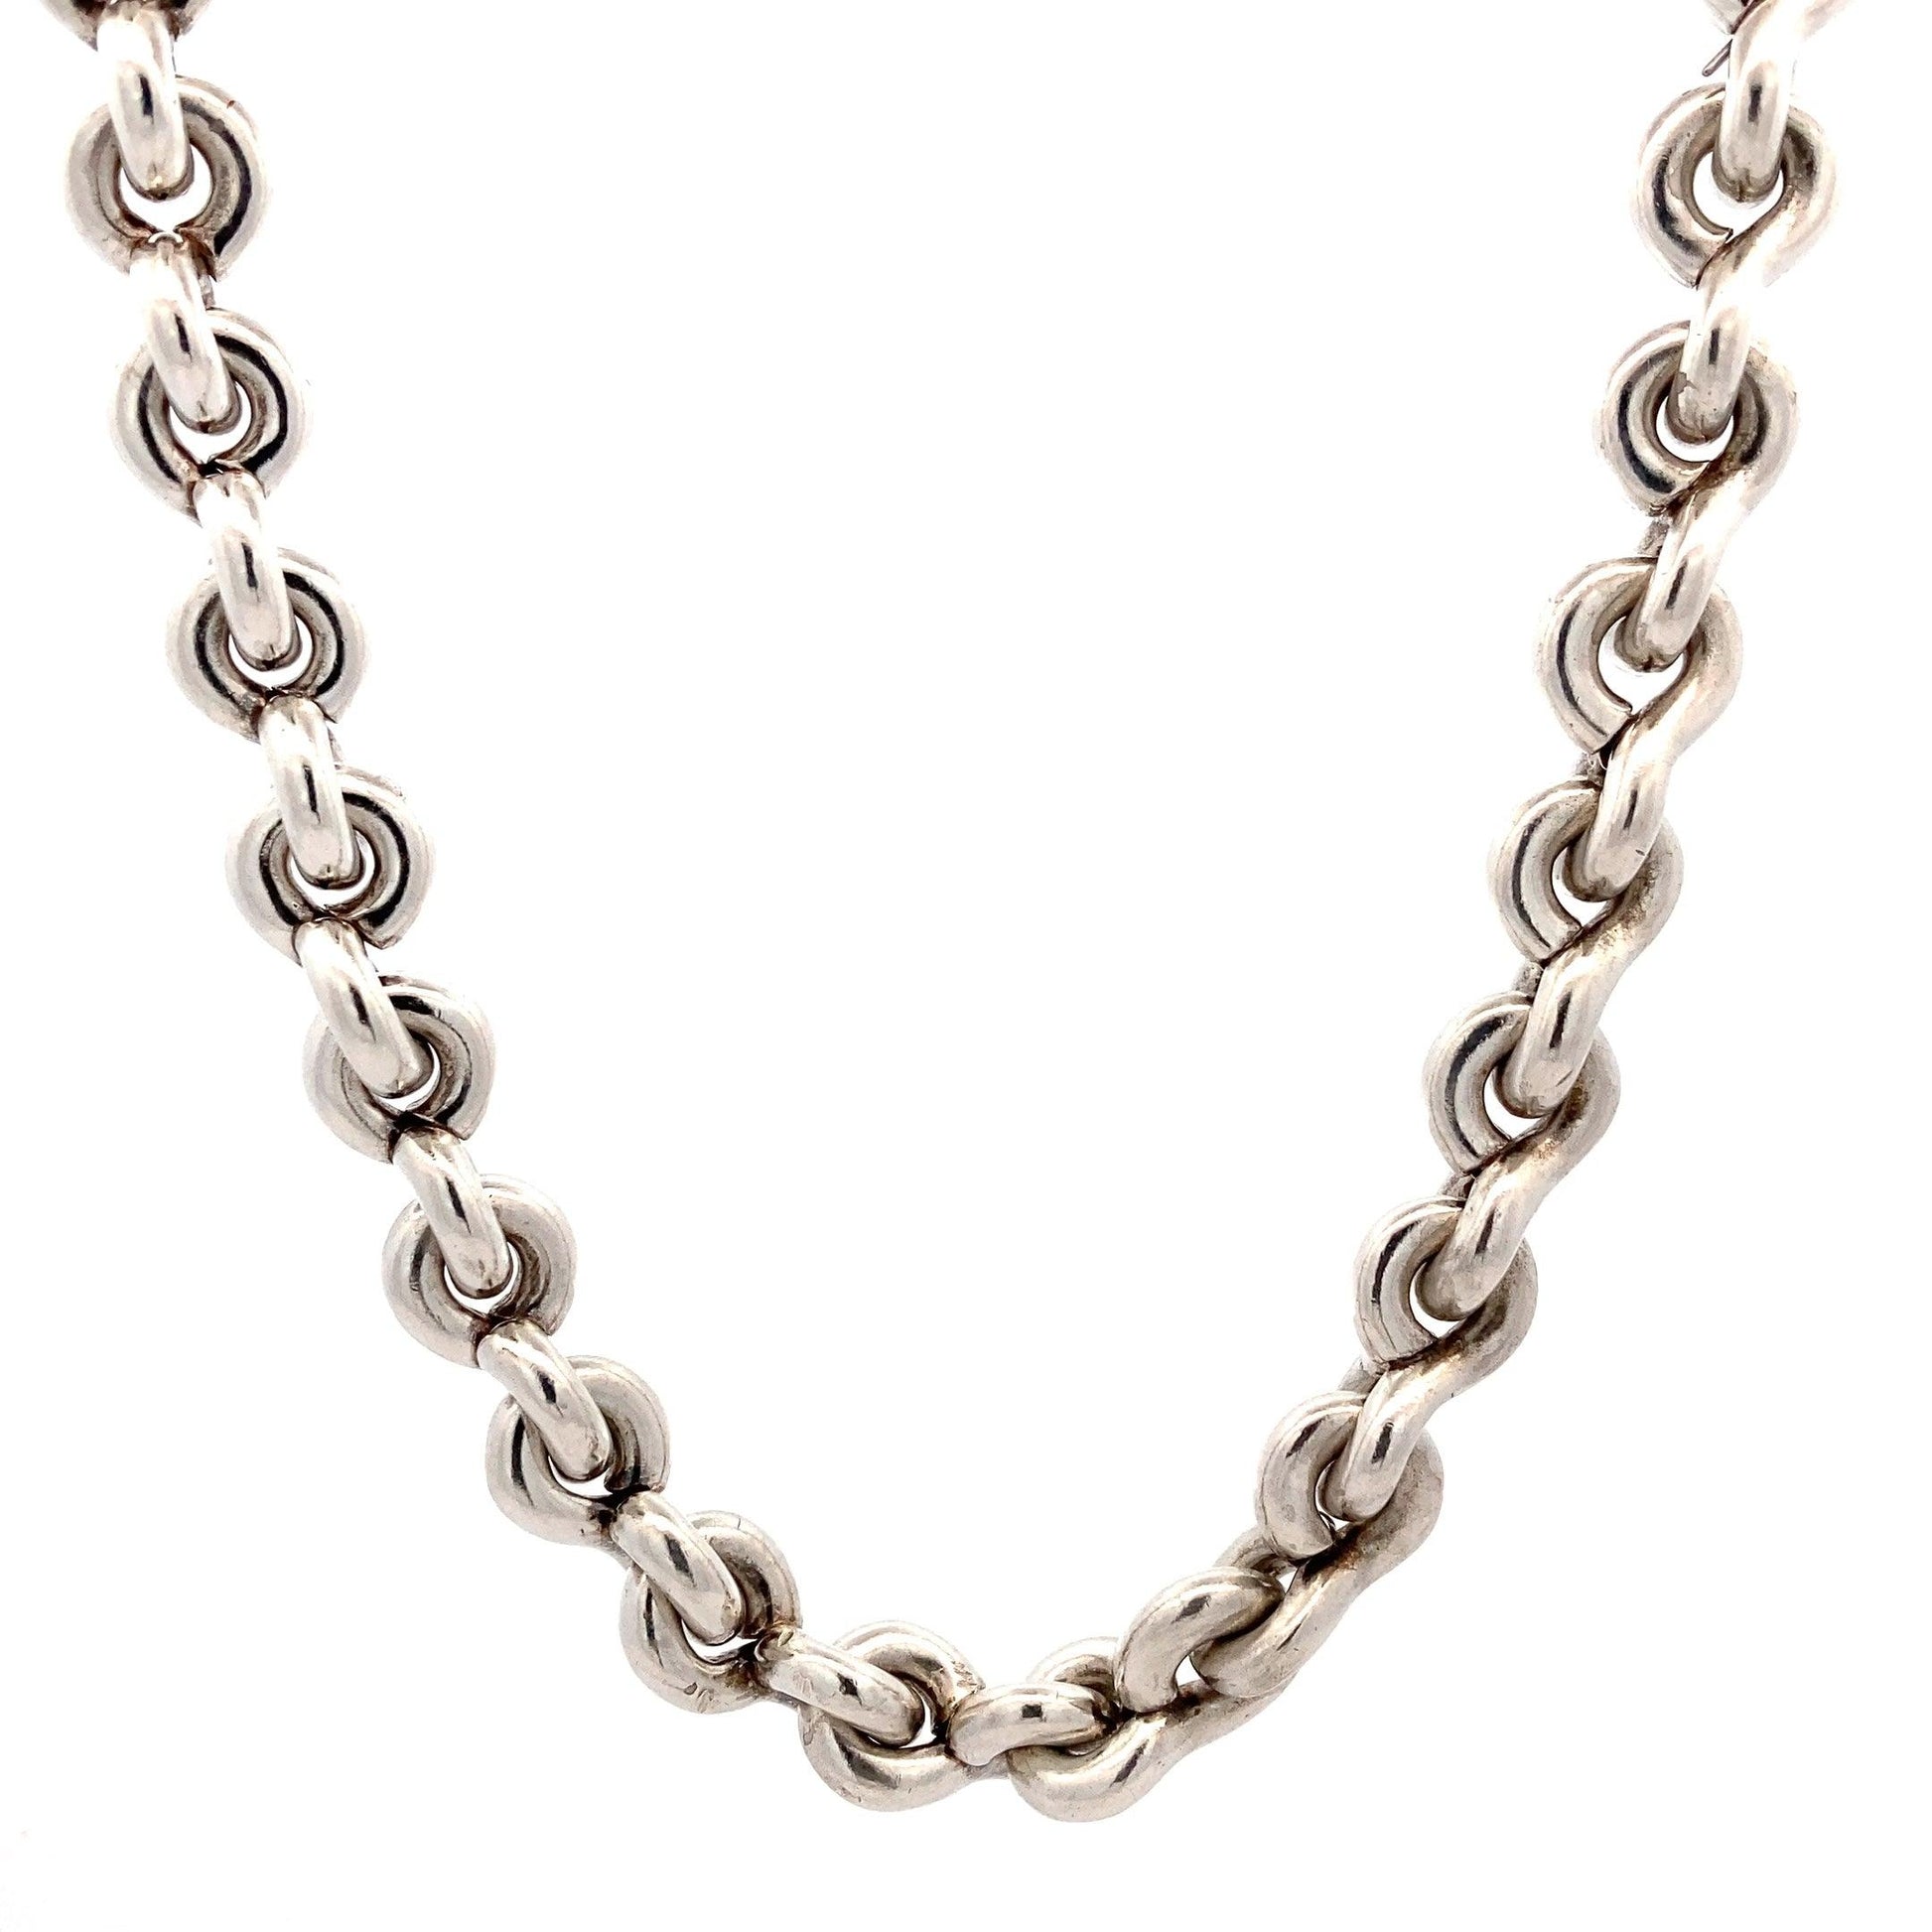 Sterling Silver 16", 7.5MM Linked Chain - ipawnishop.com